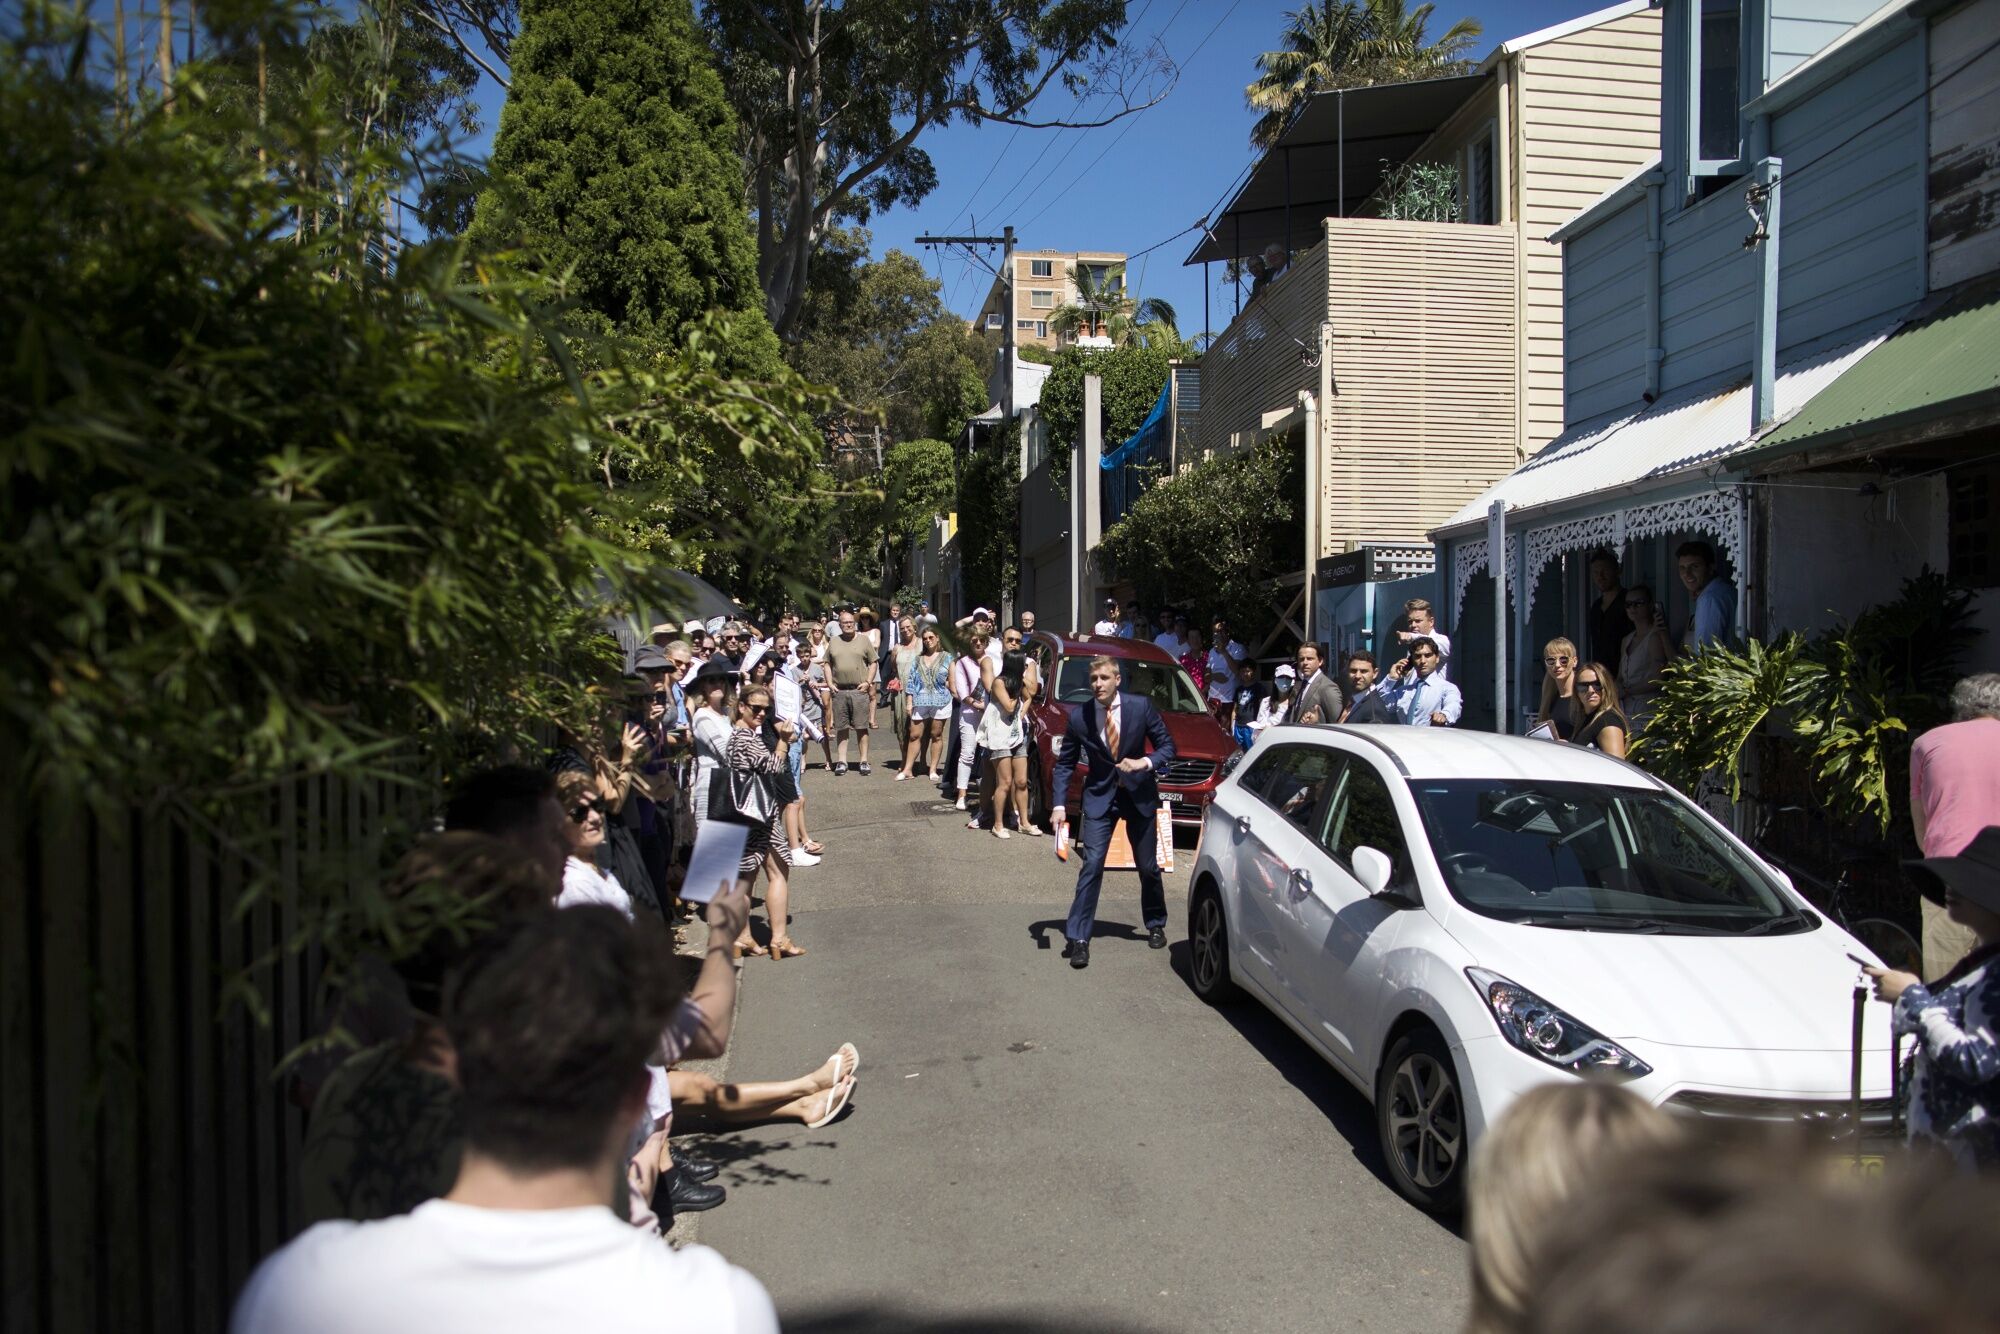 Housing Booms in Australia as Prices Surge Most in 17 Year